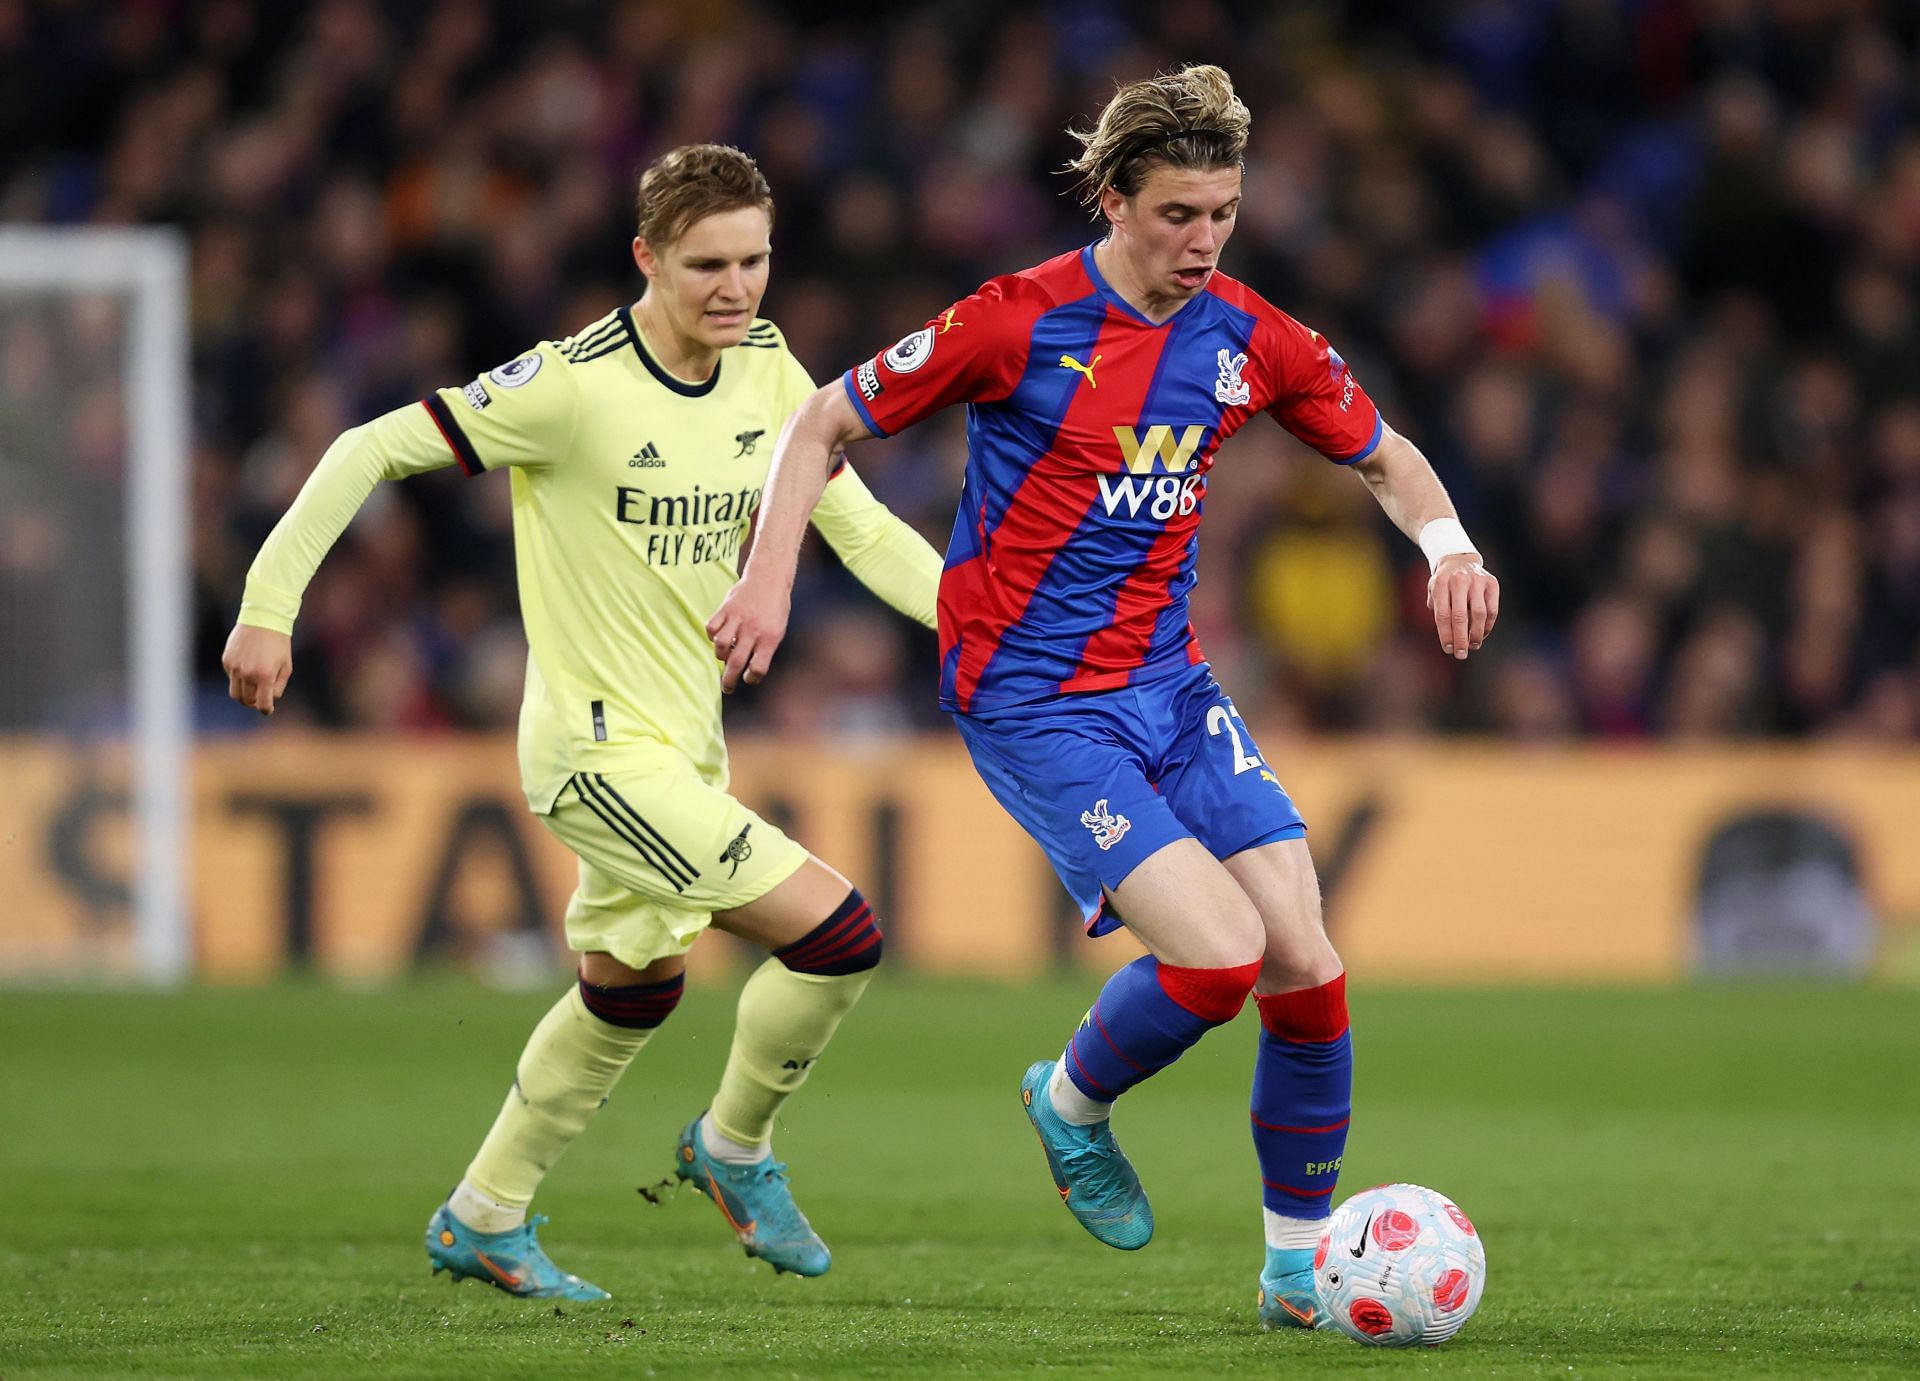 Gallagher had an outstanding loan spell at Crystal Palace